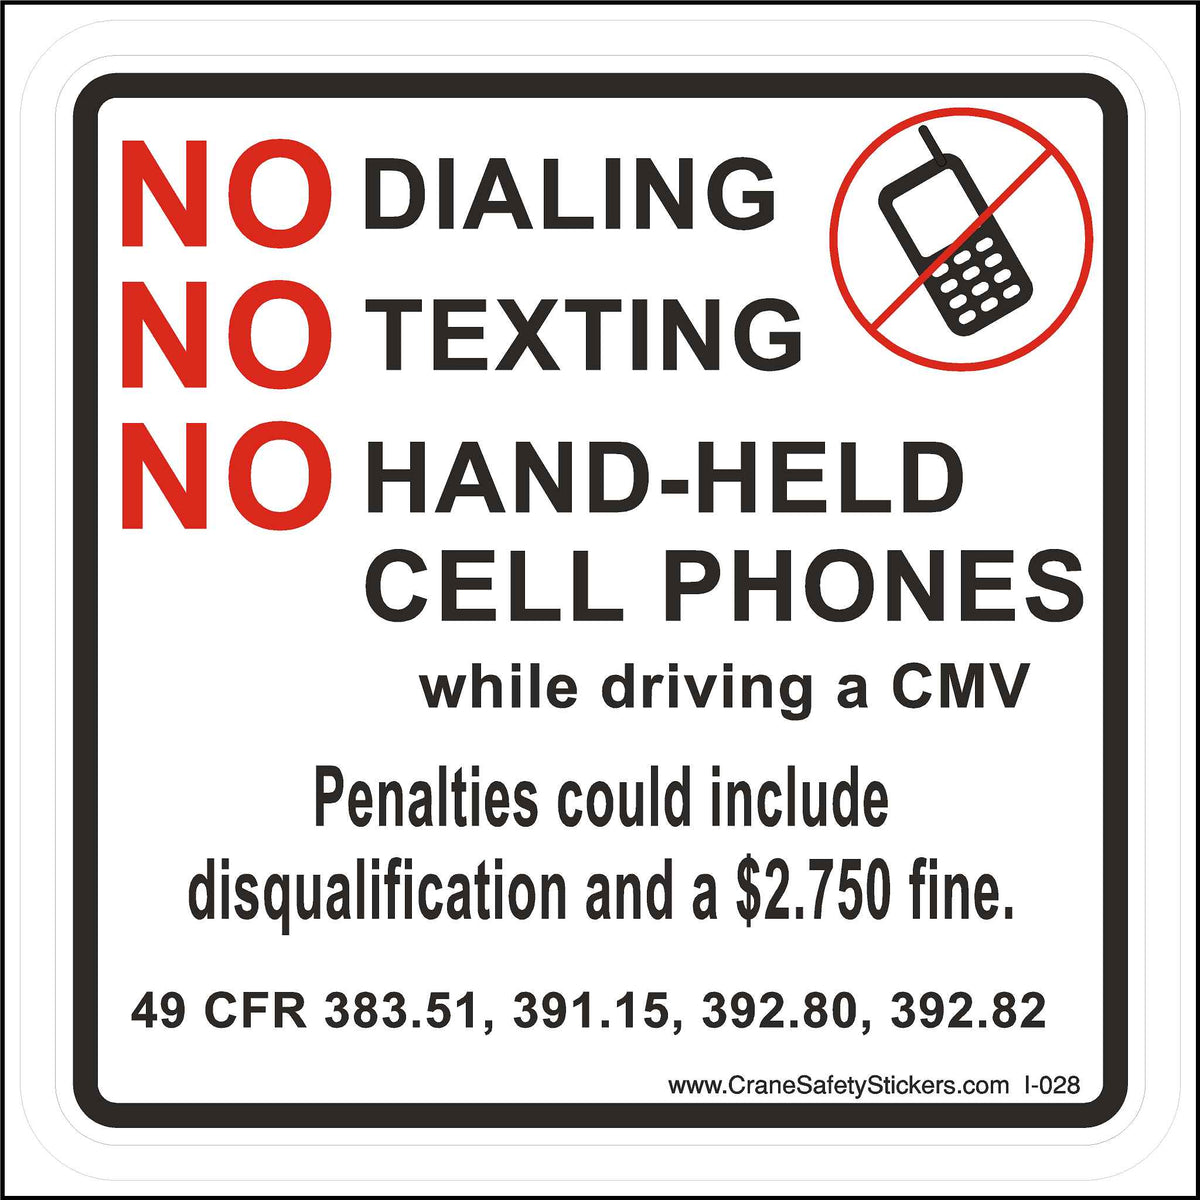 No Cell Phones While Driving a CMV Commercial Motor Vehicle Label.